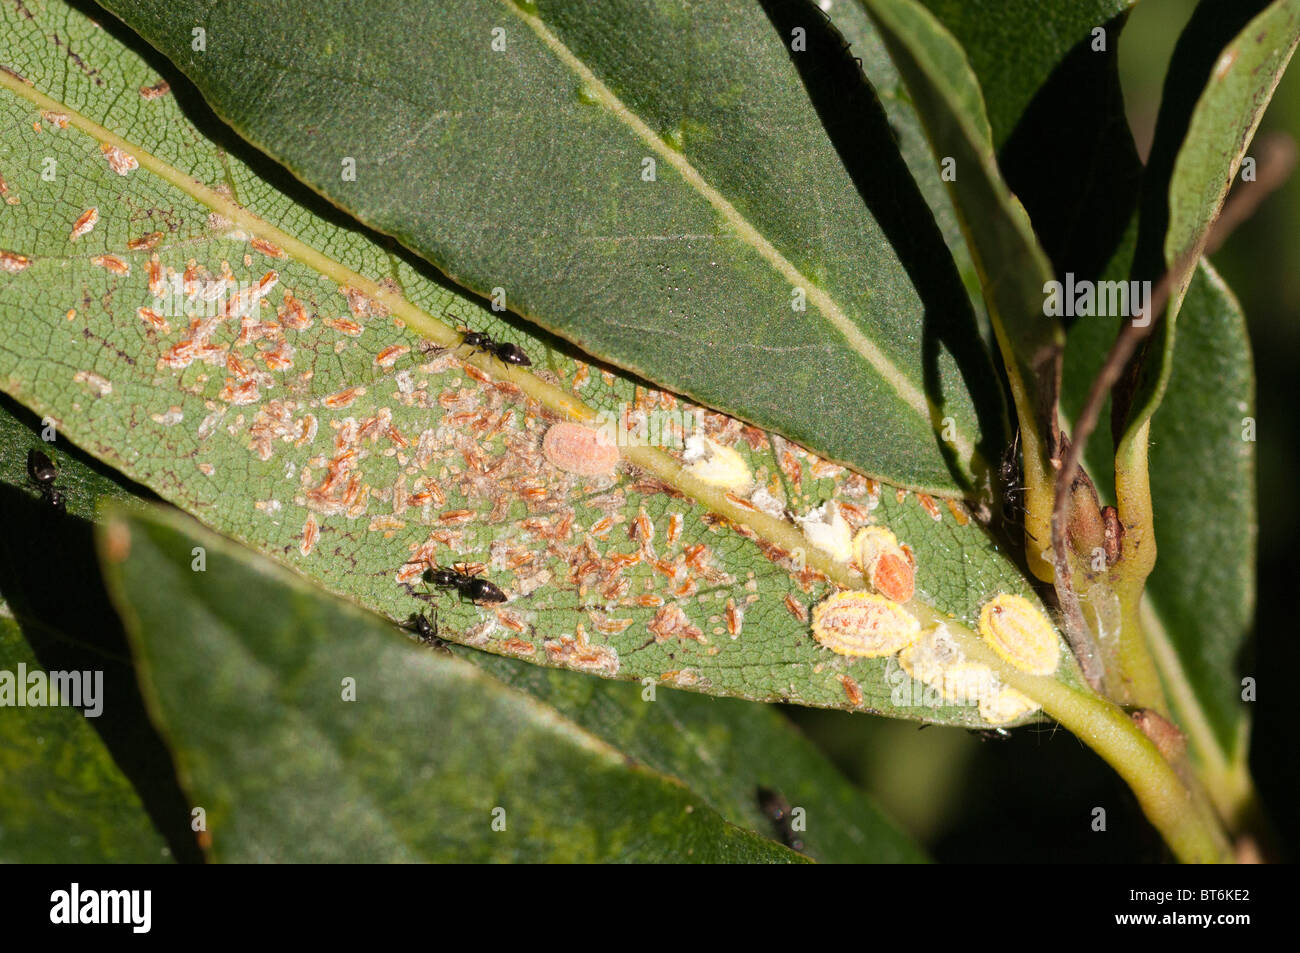 Ants and scale insects on bay leaf plant, Queensland, Australia Stock Photo